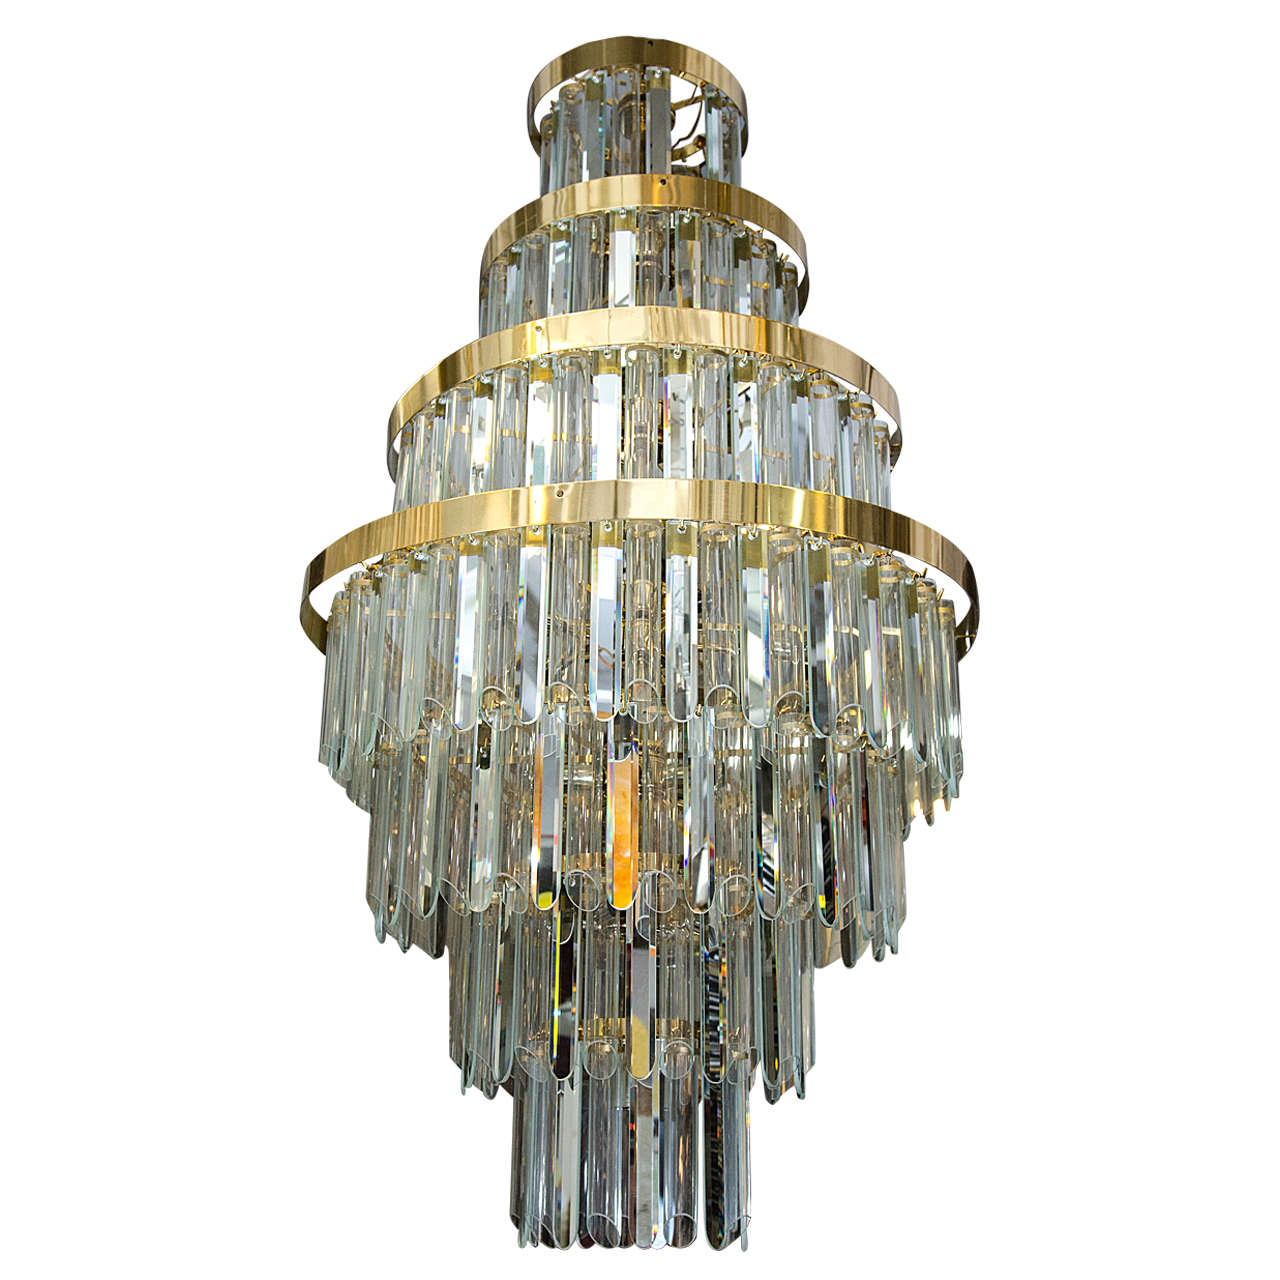 A Midcentury  Mirrored Crystal and Glass Seven-Tier Chandelier